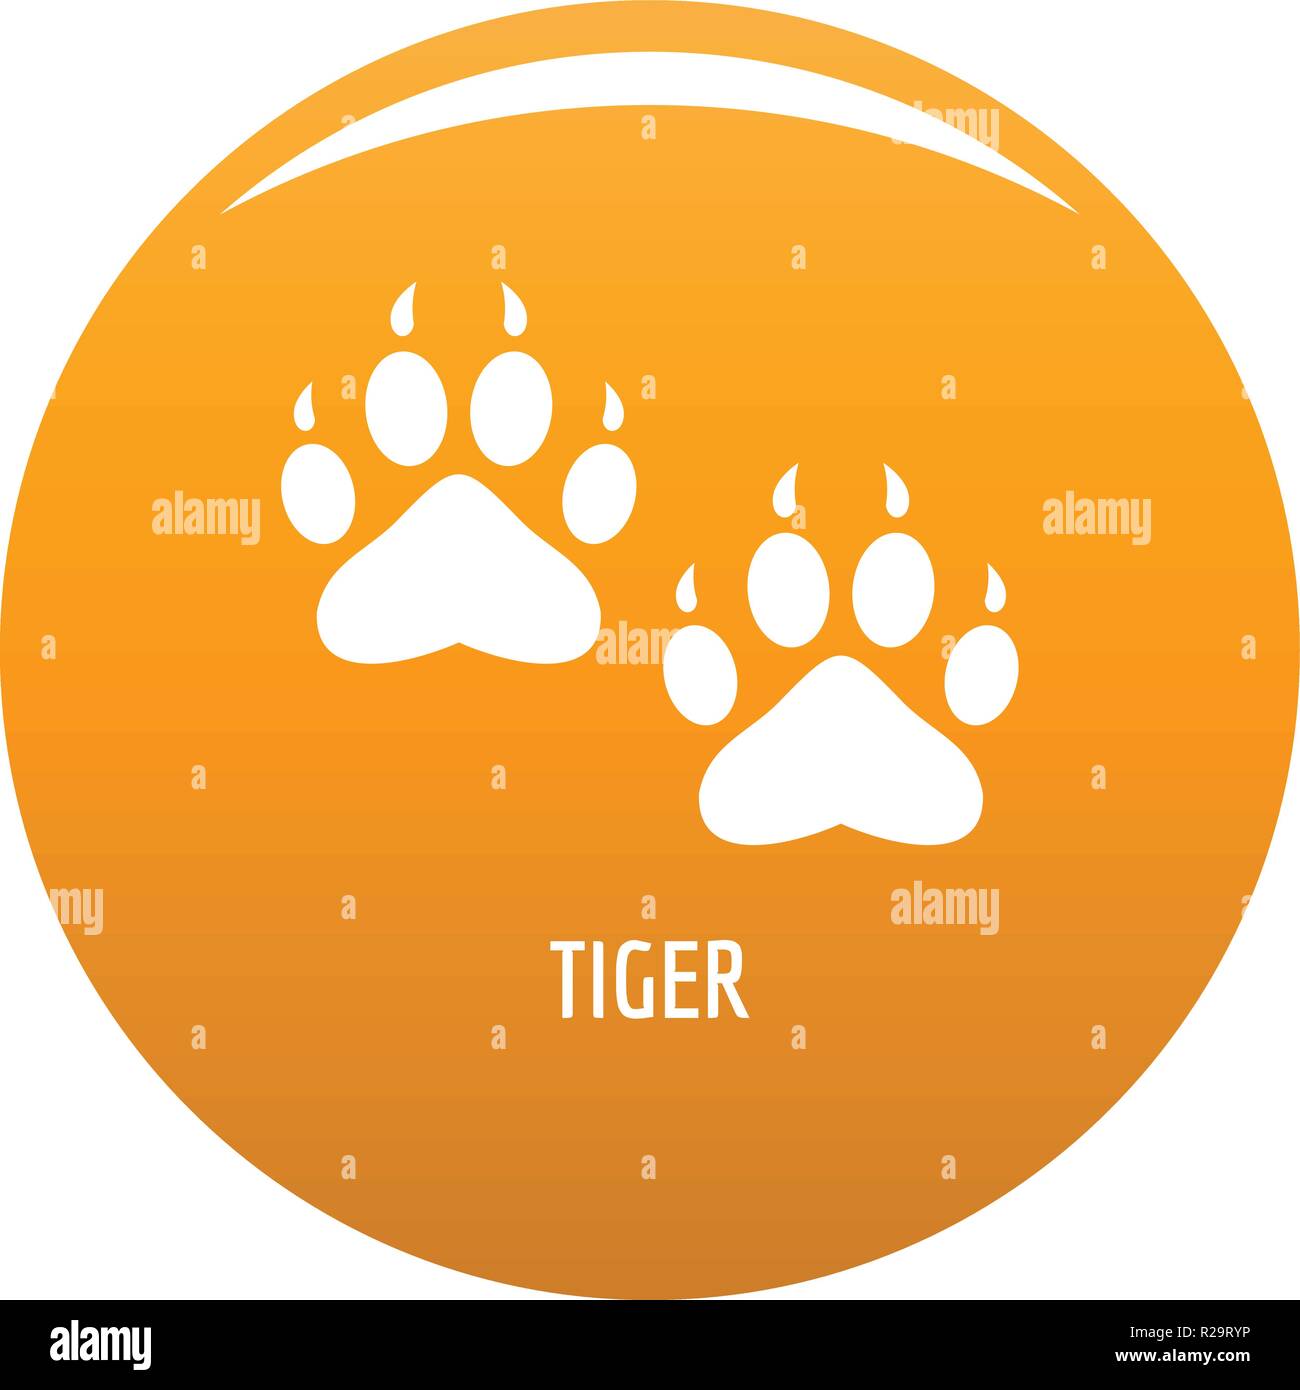 Tiger step icon. Simple illustration of tiger step vector icon for any design orange Stock Vector